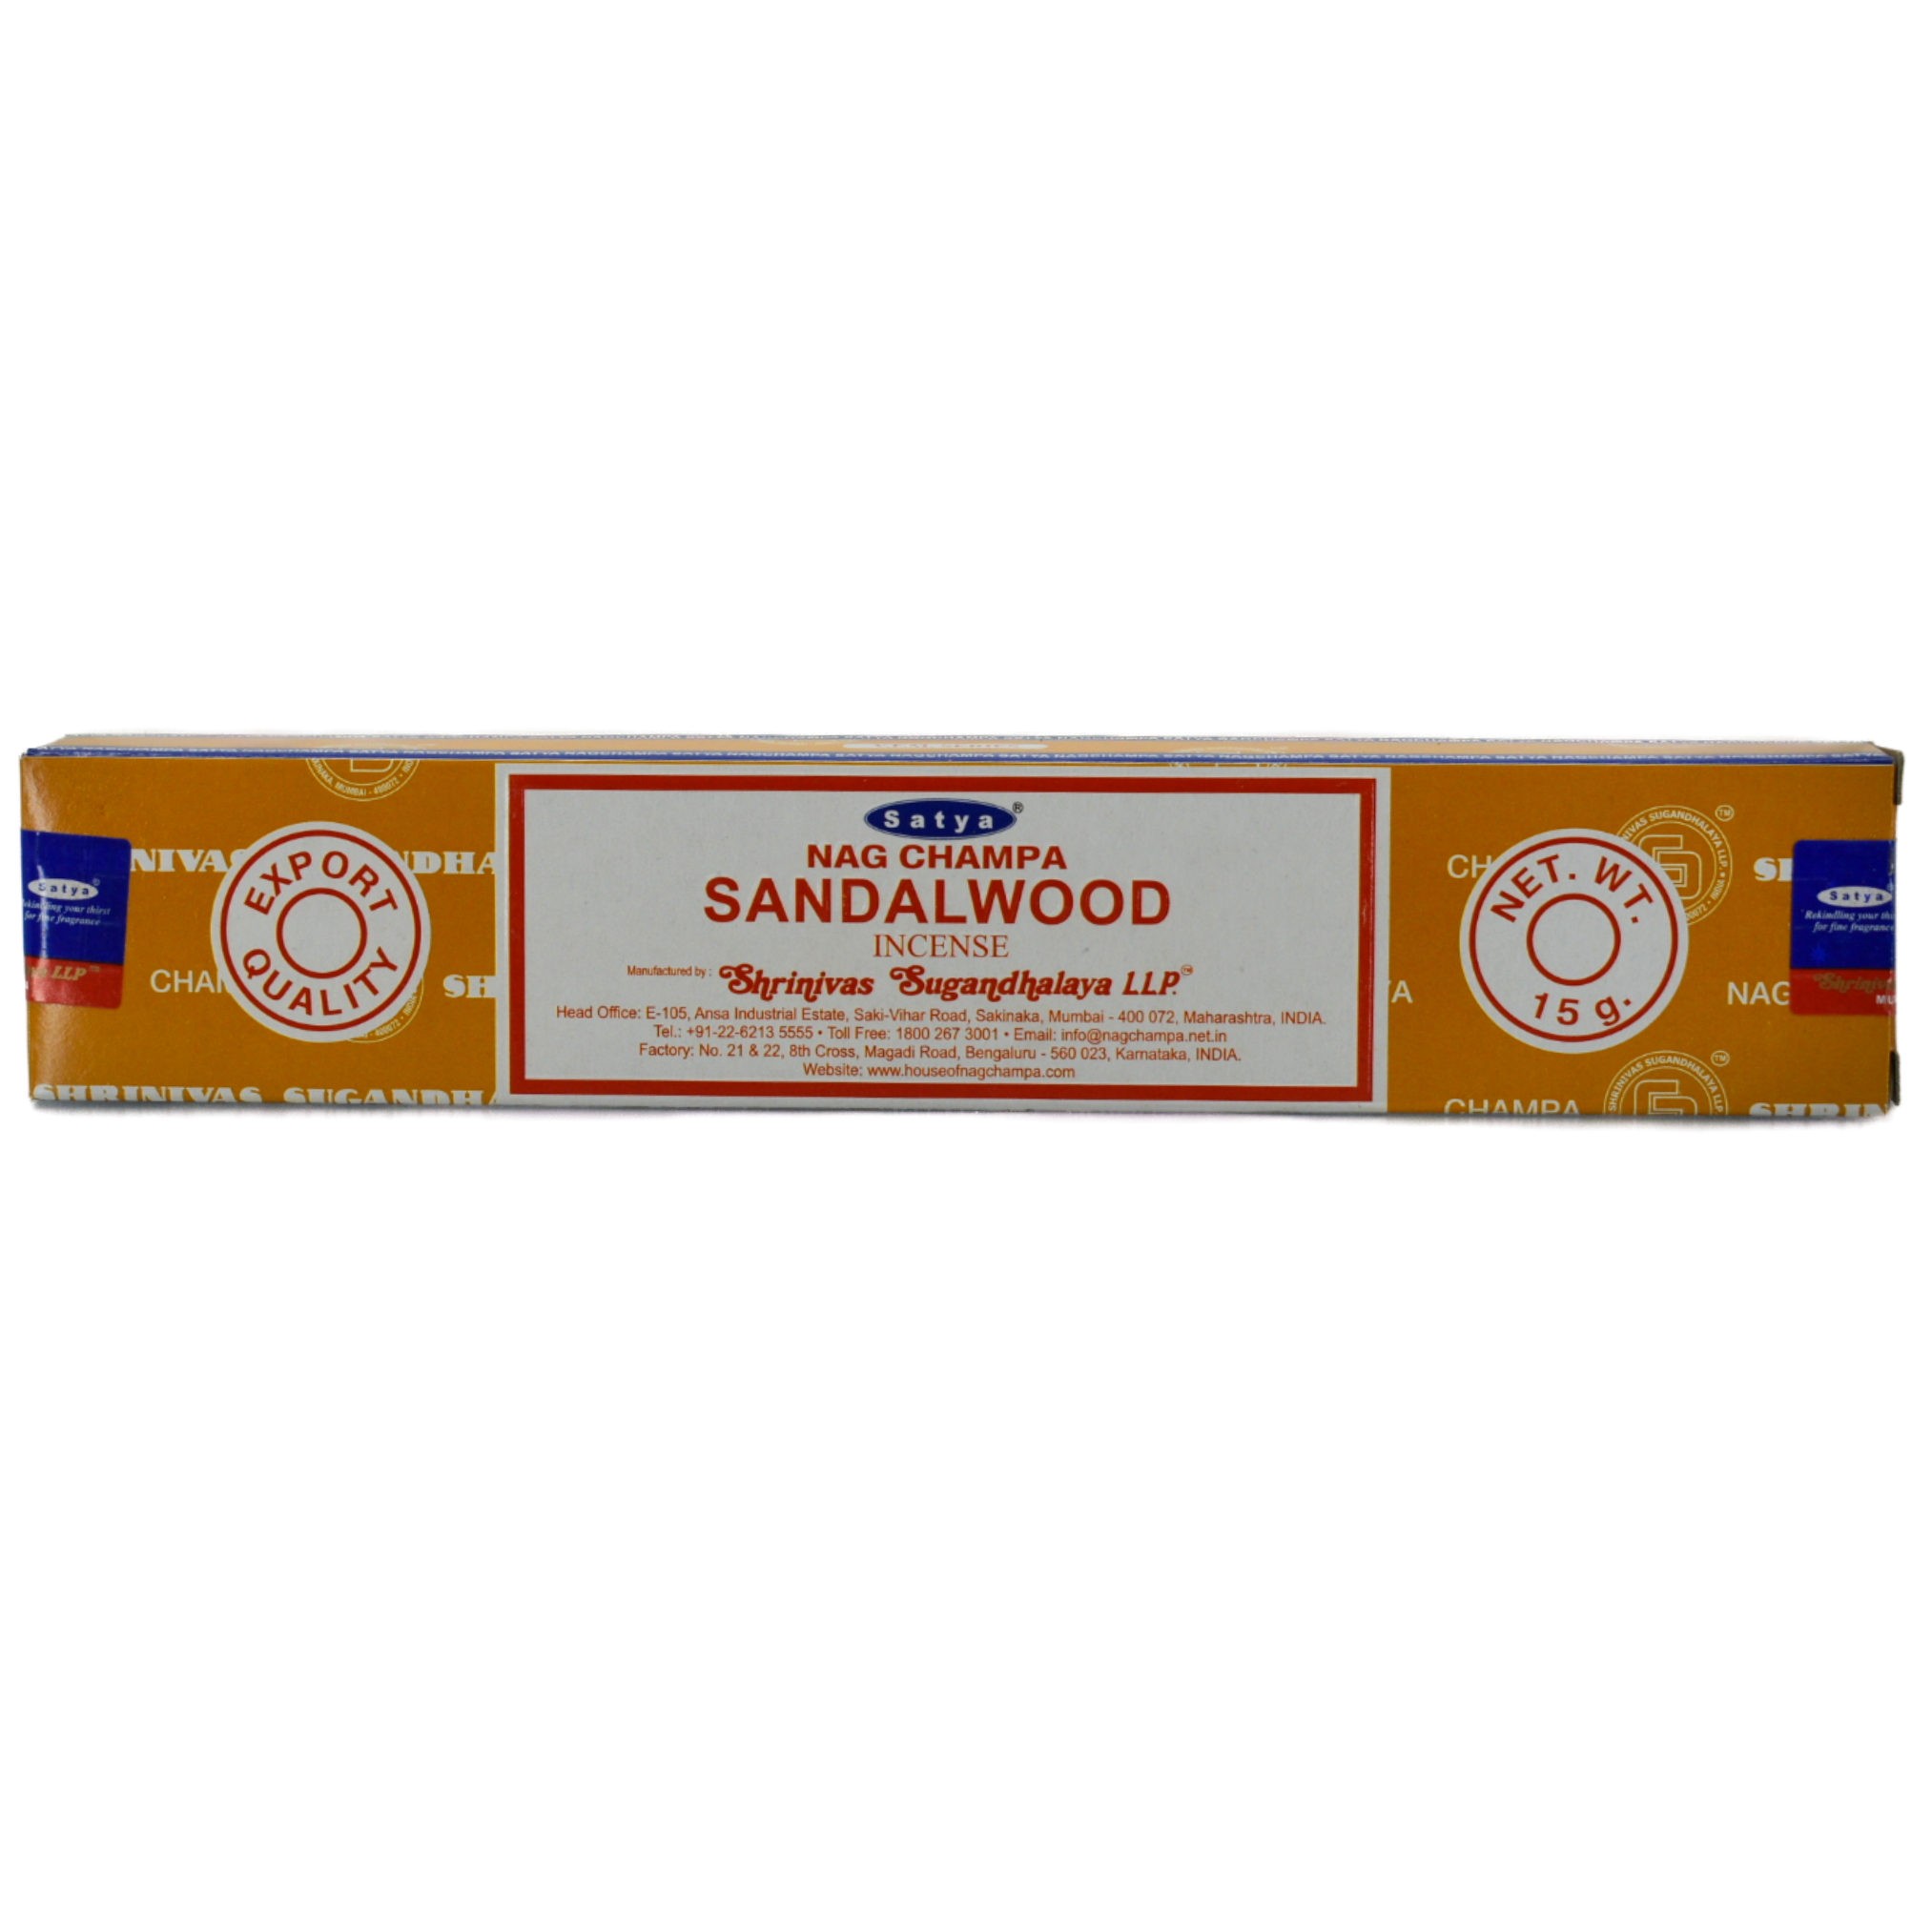 Sandalwood Sayta Incense Sticks.  The box is a burnt orange color with lines through it.  The lines are company words.  In the center there is a white rectangle with a red frame within the border.  The top half of the box lists the company and title: Sayta Nag Champa Sandalwood Incense.  The wording below is the manufacturer&